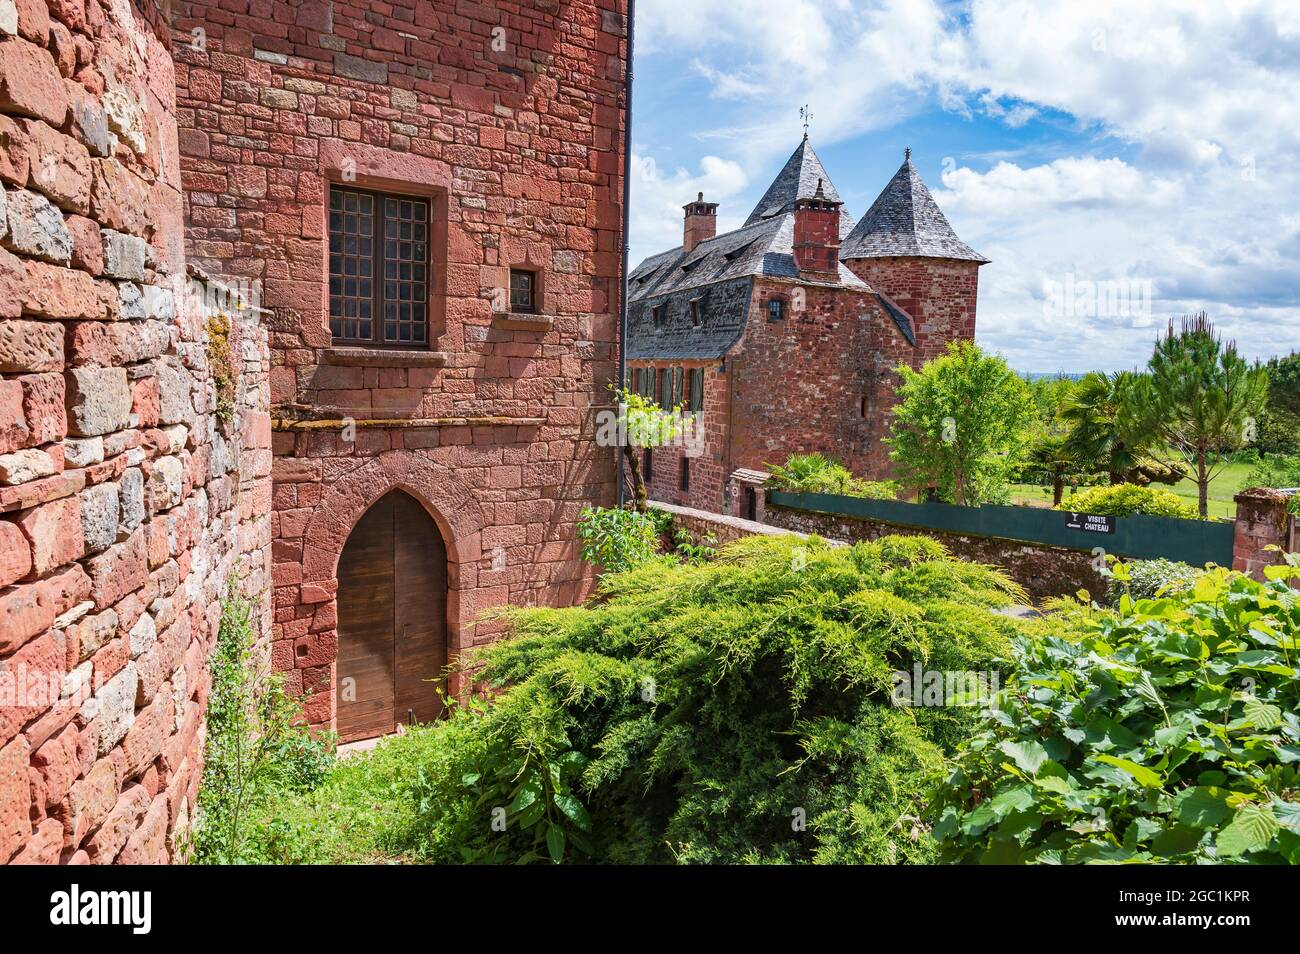 View of Château de Vassinhac in Collonges-la-Rouge, classified as one of France’s most beautiful villages. Stock Photo